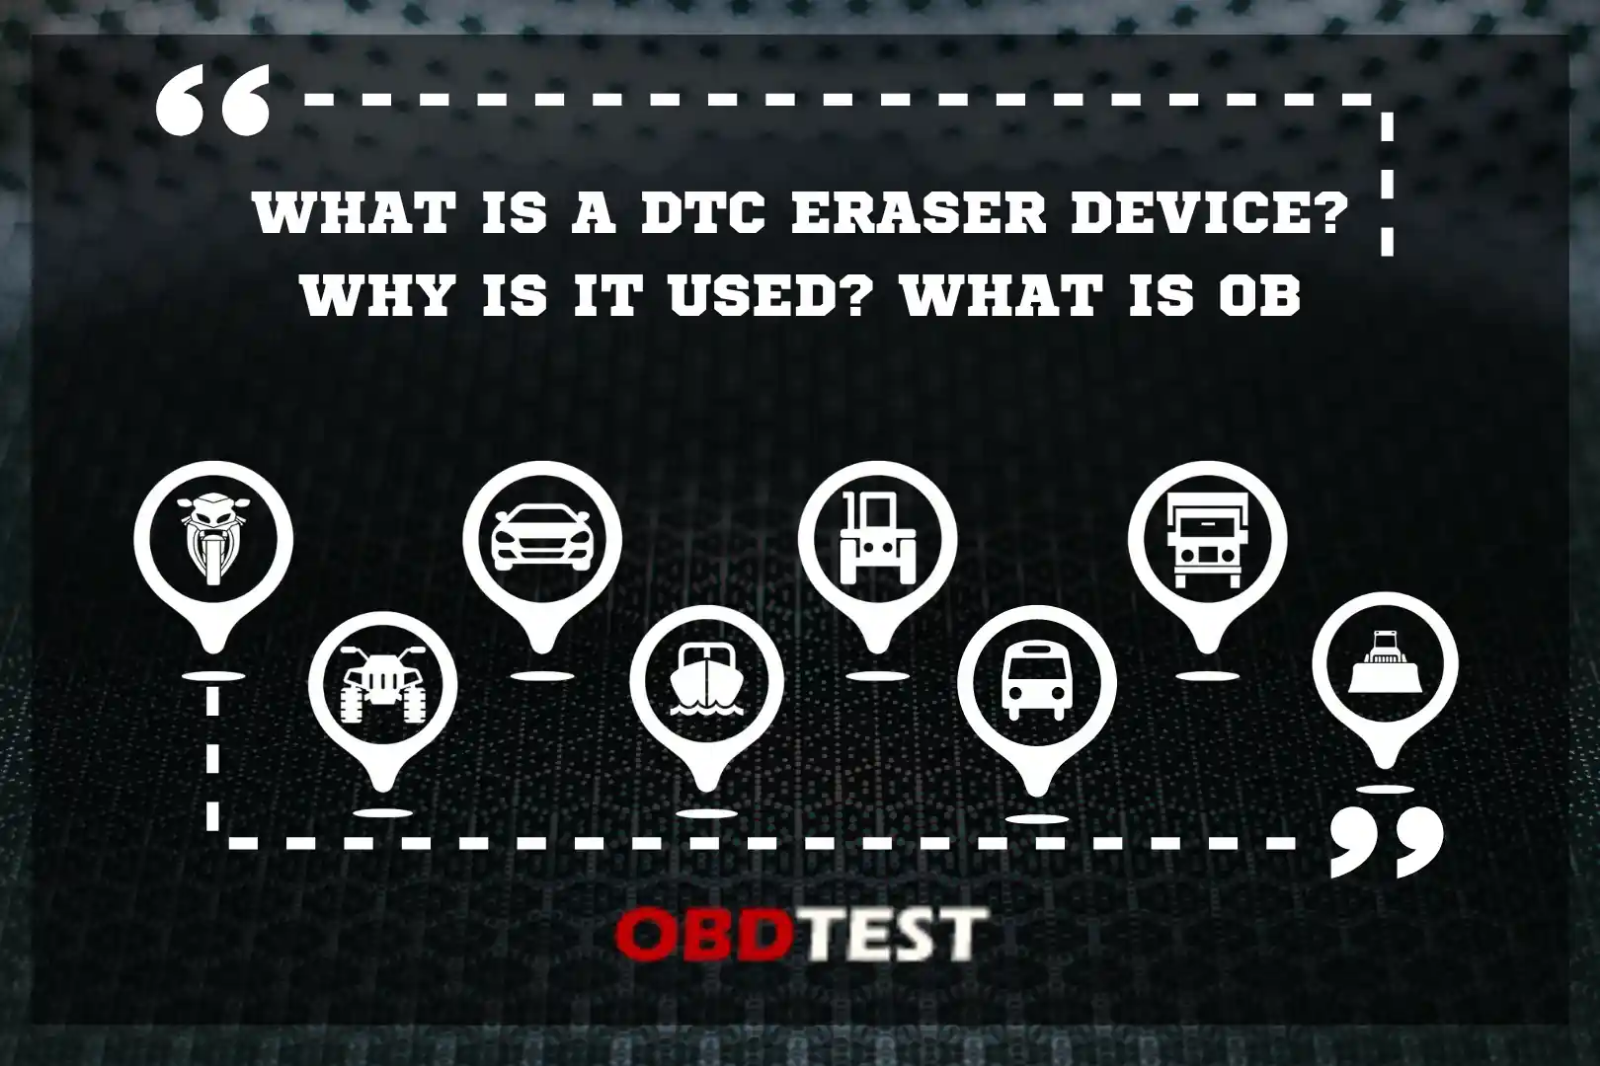 What is a DTC Eraser device? What is OBD?